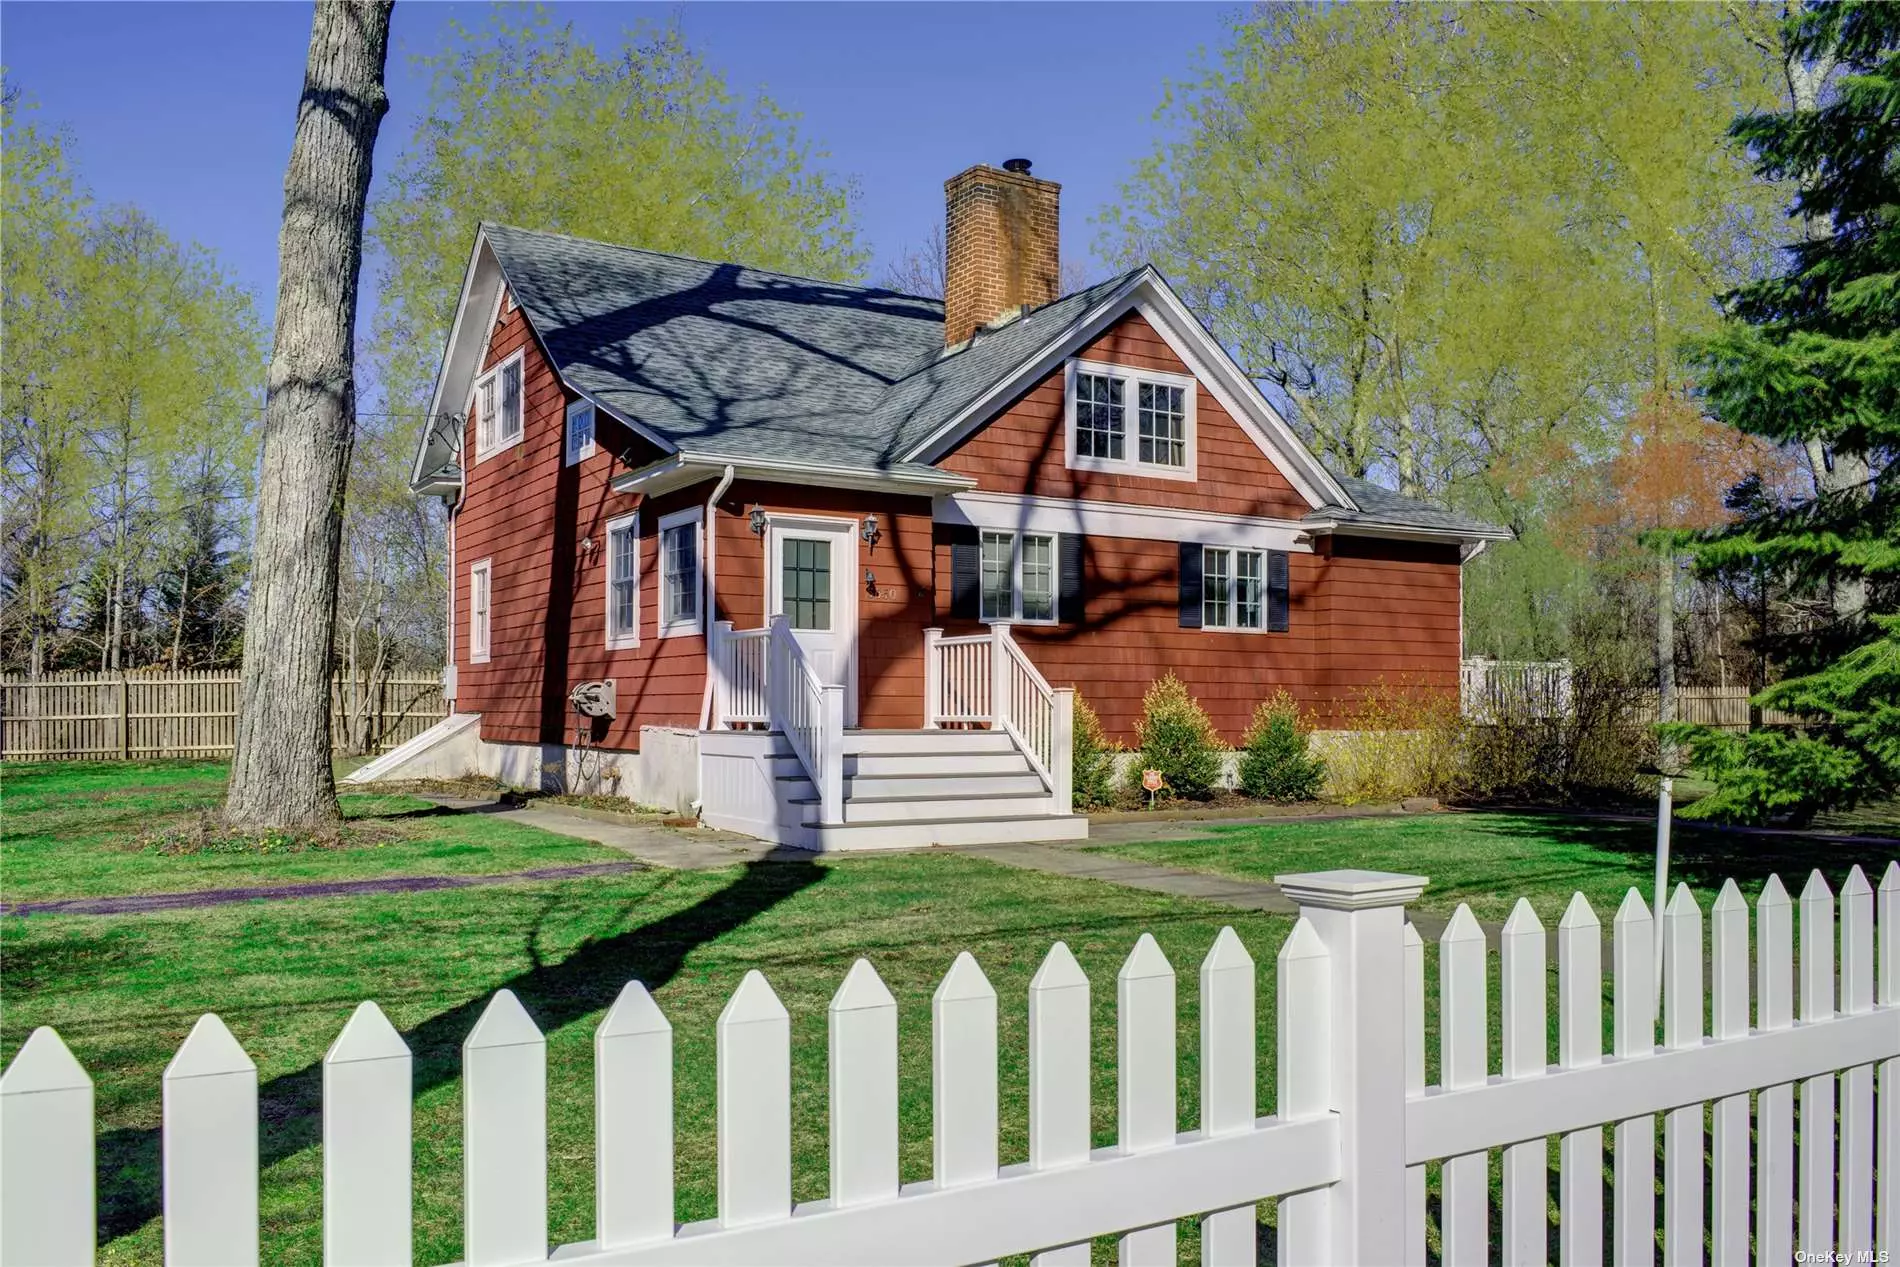 Southold North Fork - Historic Main Bayview schoolhouse converted to country residence. Available for 2 week stay (July 30-August 13) all inclusive, $5500, BOOK NOW! Or, winter rental, September 15, 2023 - June 15, 2024 $4200 per mo plus utilities, etc Country residence features 5 bedrooms in historic Main Bayview Schoolhouse converted to residence - sleeps max 10 people. Pet friendly. Equidistant to Cedar Beach and Goose Creek Beach. Moments to village of Southold, North Fork wine trail, area shops and top tier restaurants. An ideal vacation destination OR winter residence. Private fenced yard. Living room features woodstove. Finished lower level offers playspace or make it a home office.